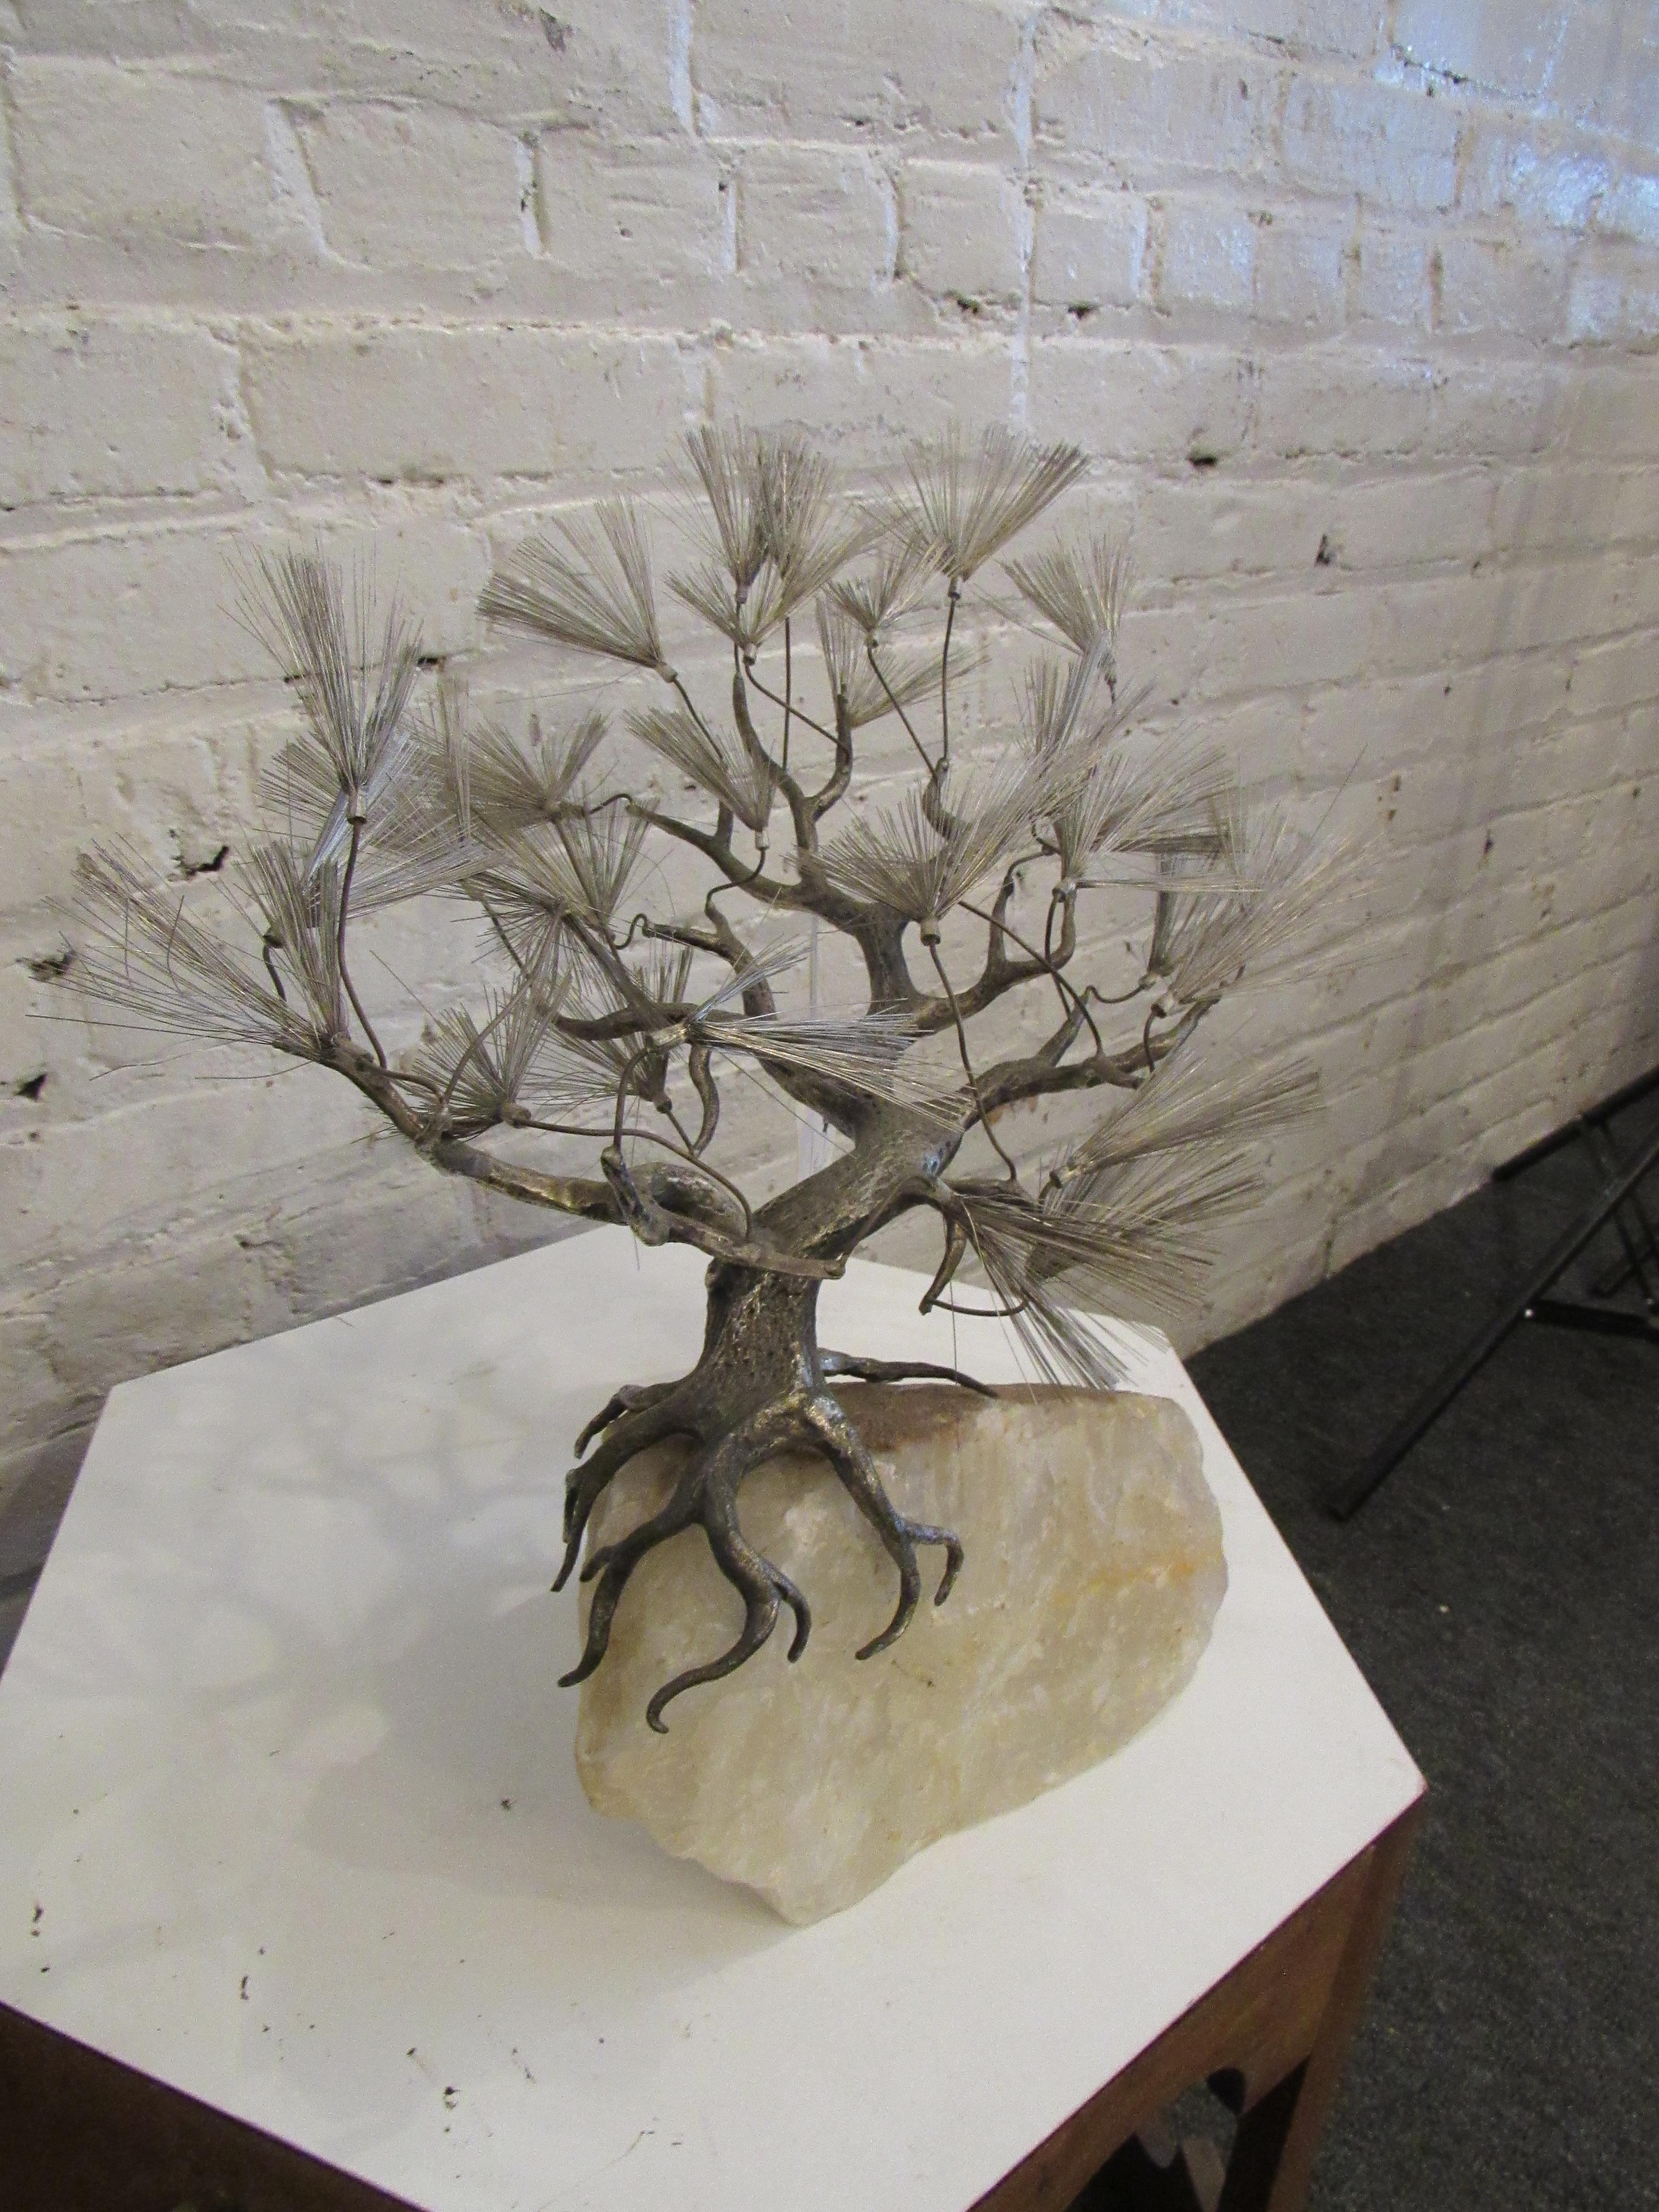 A vintage sculpture perfect for any table top or book shelf, this metal bonsai tree sits atop a hefty chunk of quartz. 
Please confirm item location with seller (NY/NJ).